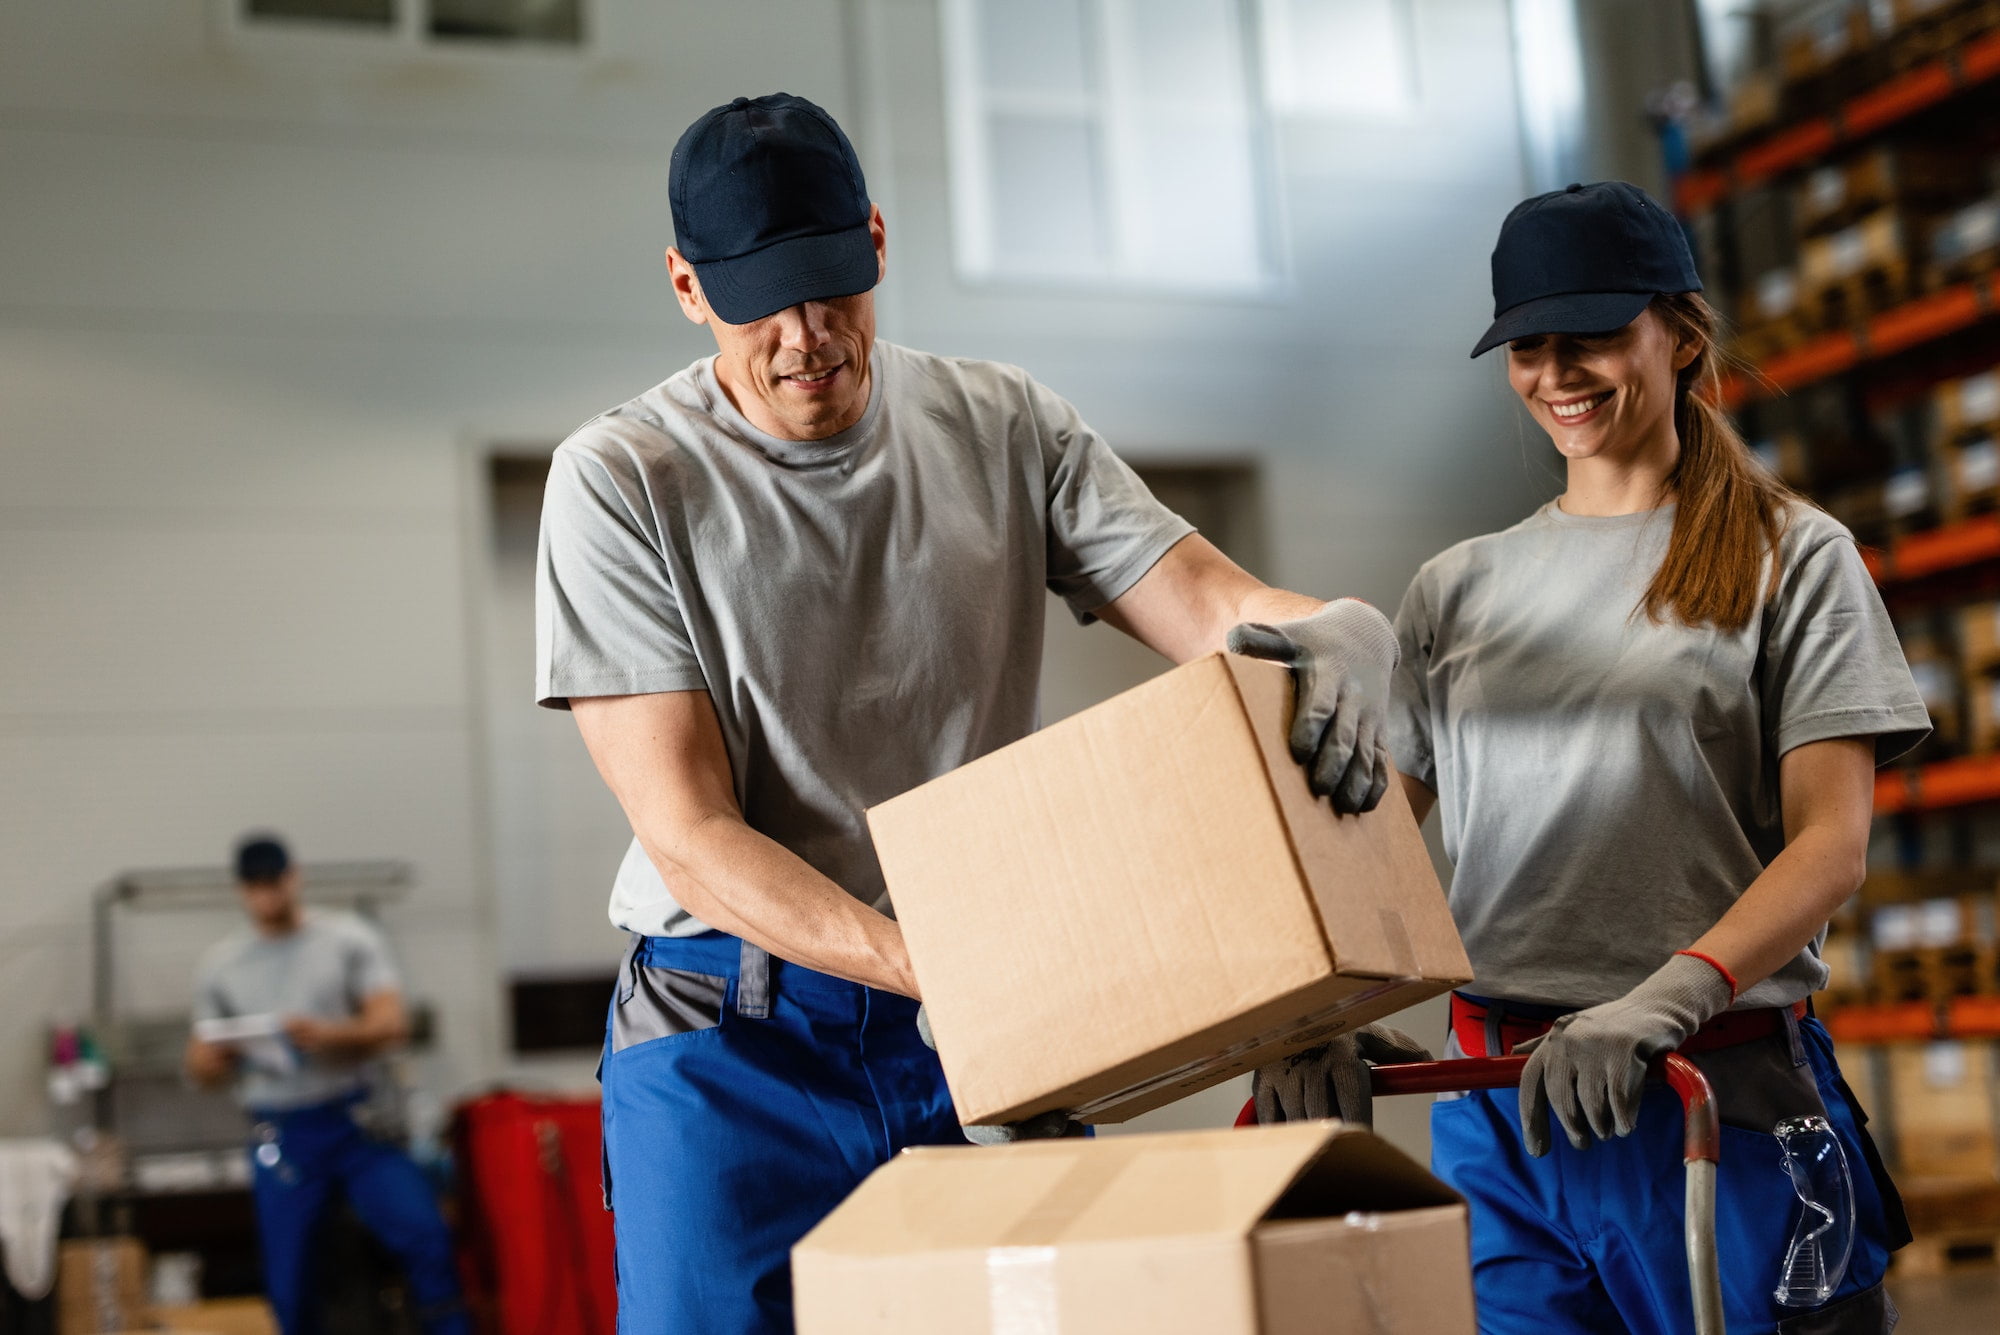 A man and a woman working in a warehouse.